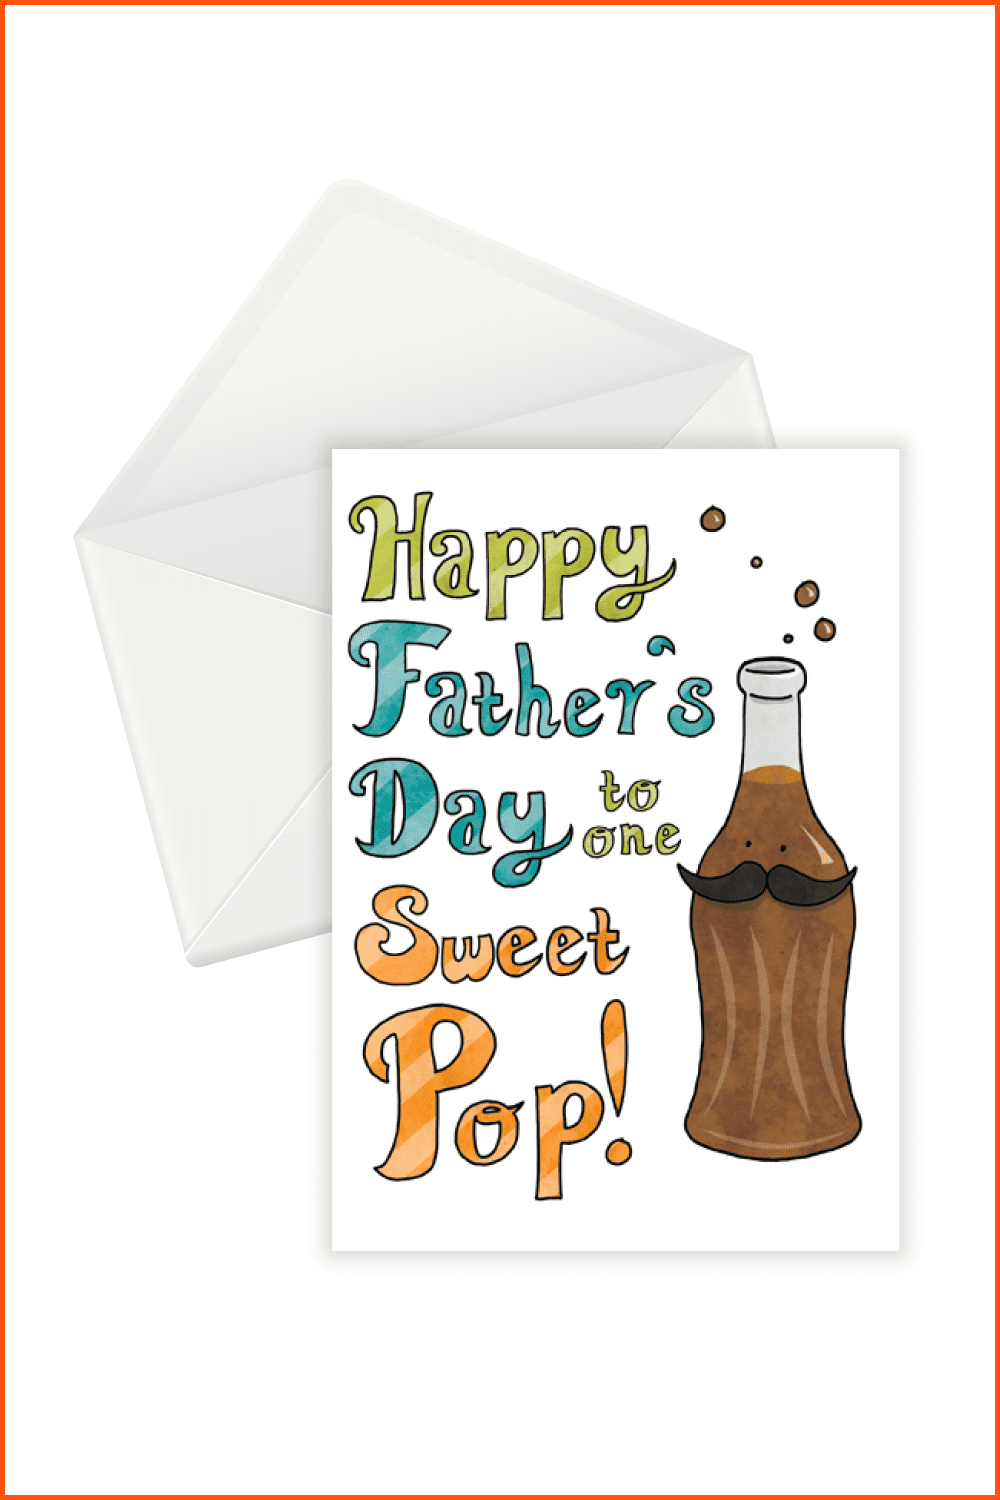 Sweet Pop eCard Designed by Claire Lordon.